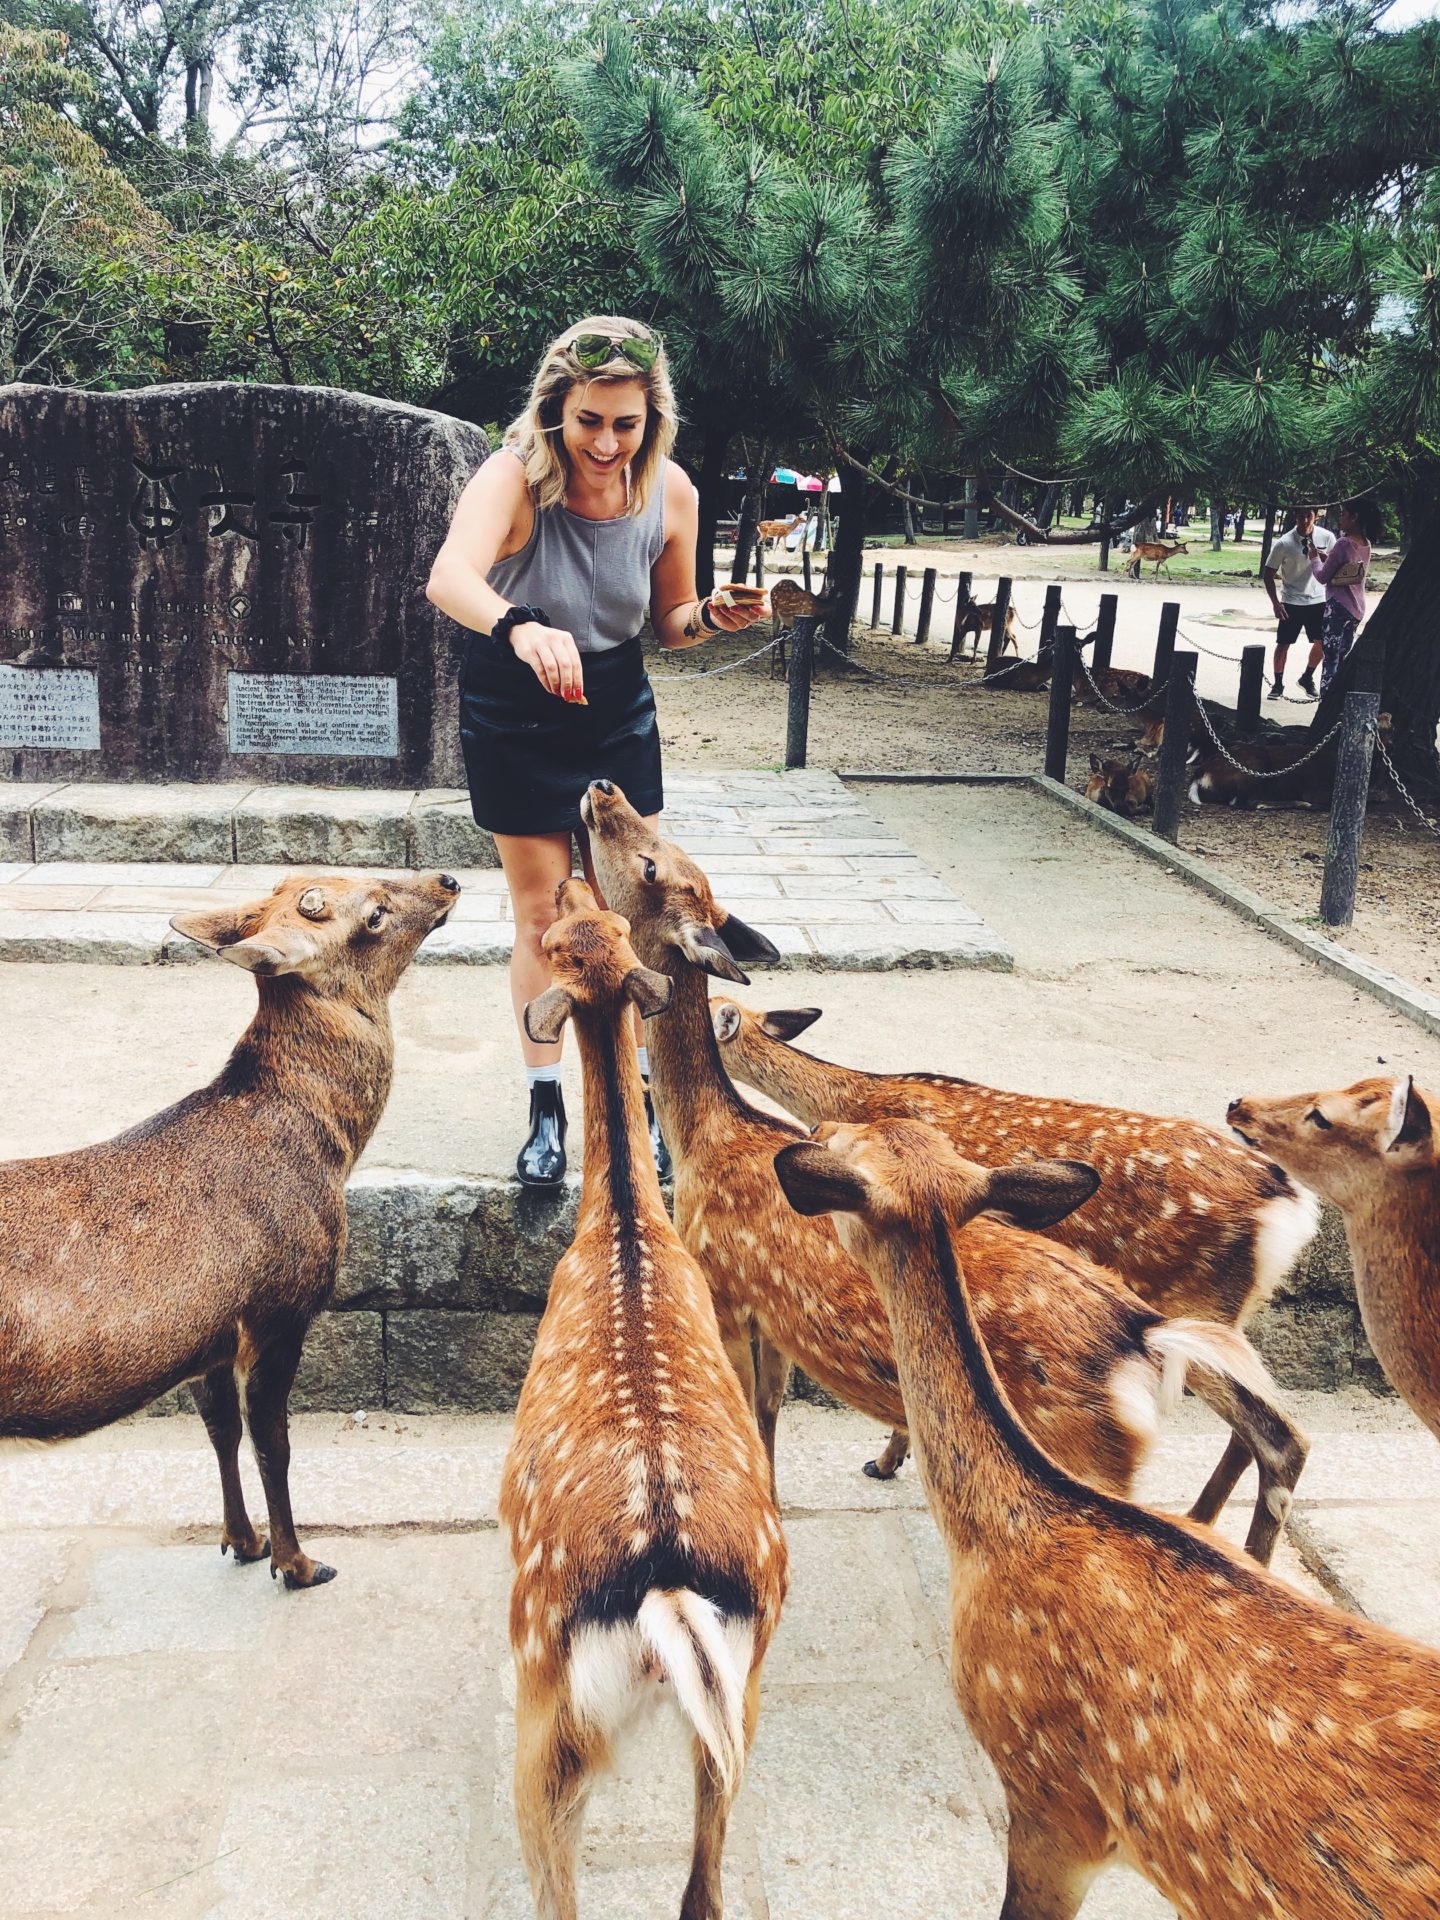 feeding the deer in nara japan before girl gets chased down by the dear